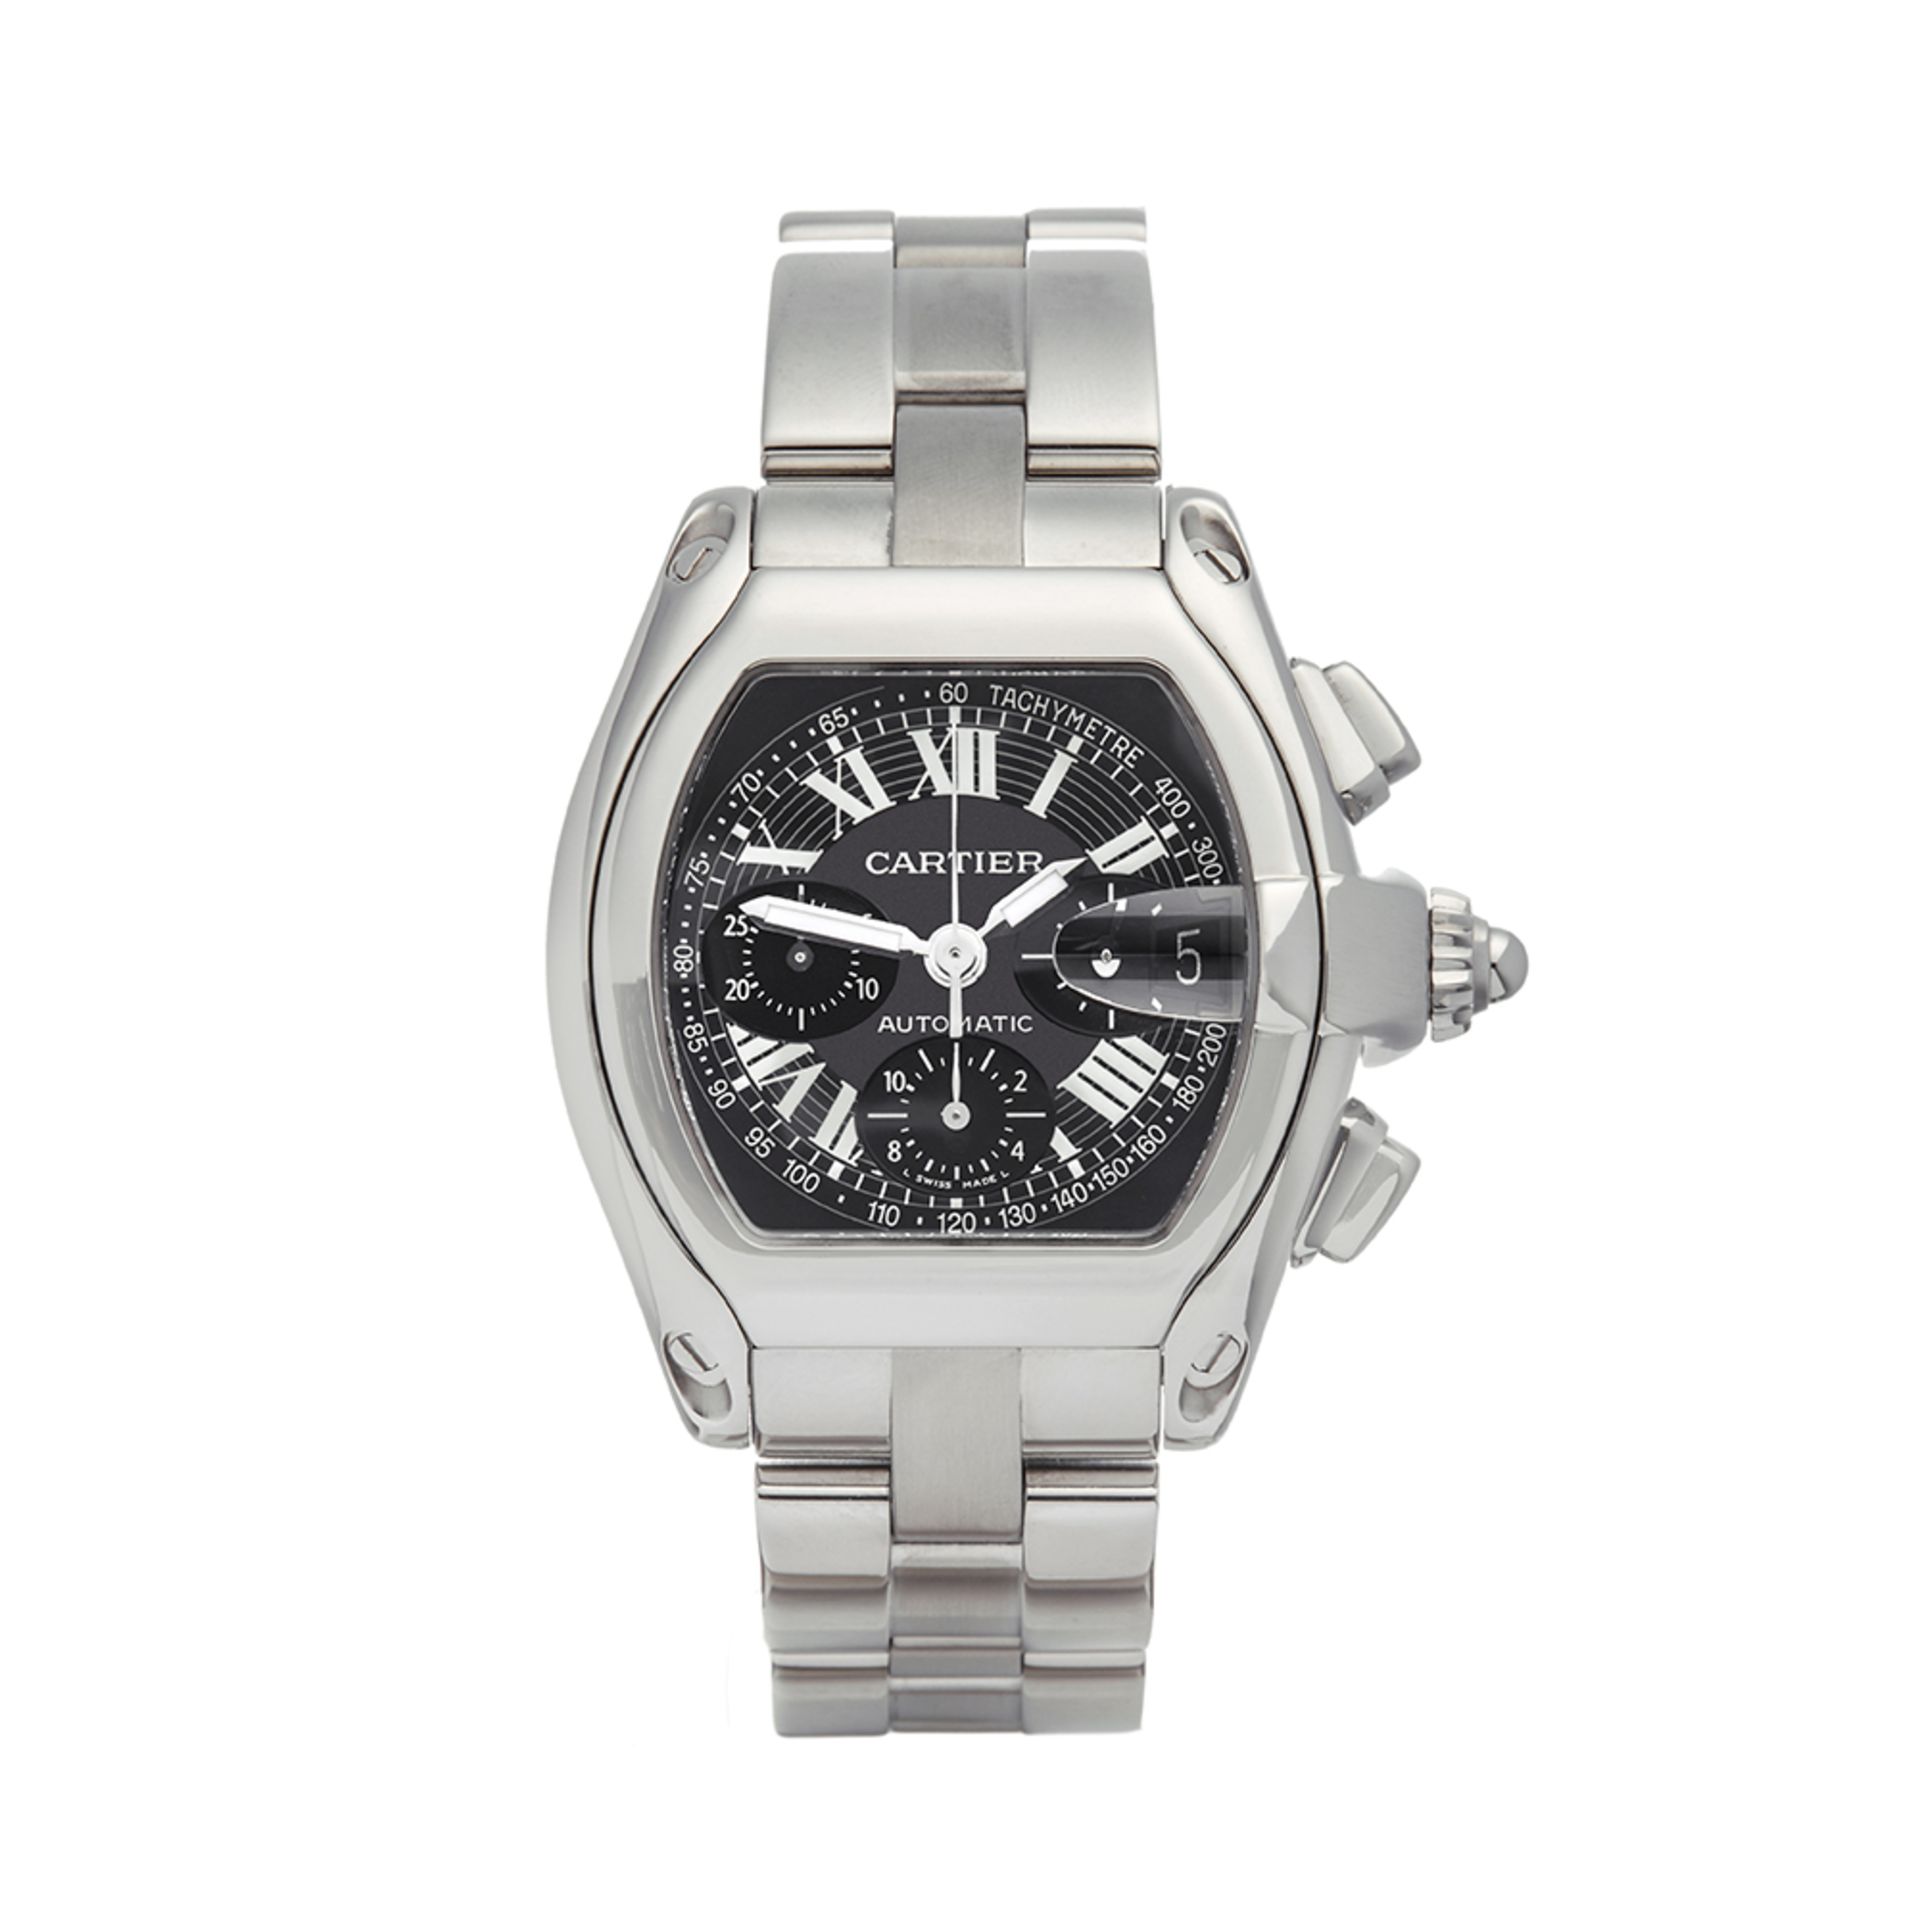 Cartier Roadster XL Chronograph Stainless Steel - 2618 or W62007X6 - Image 2 of 8